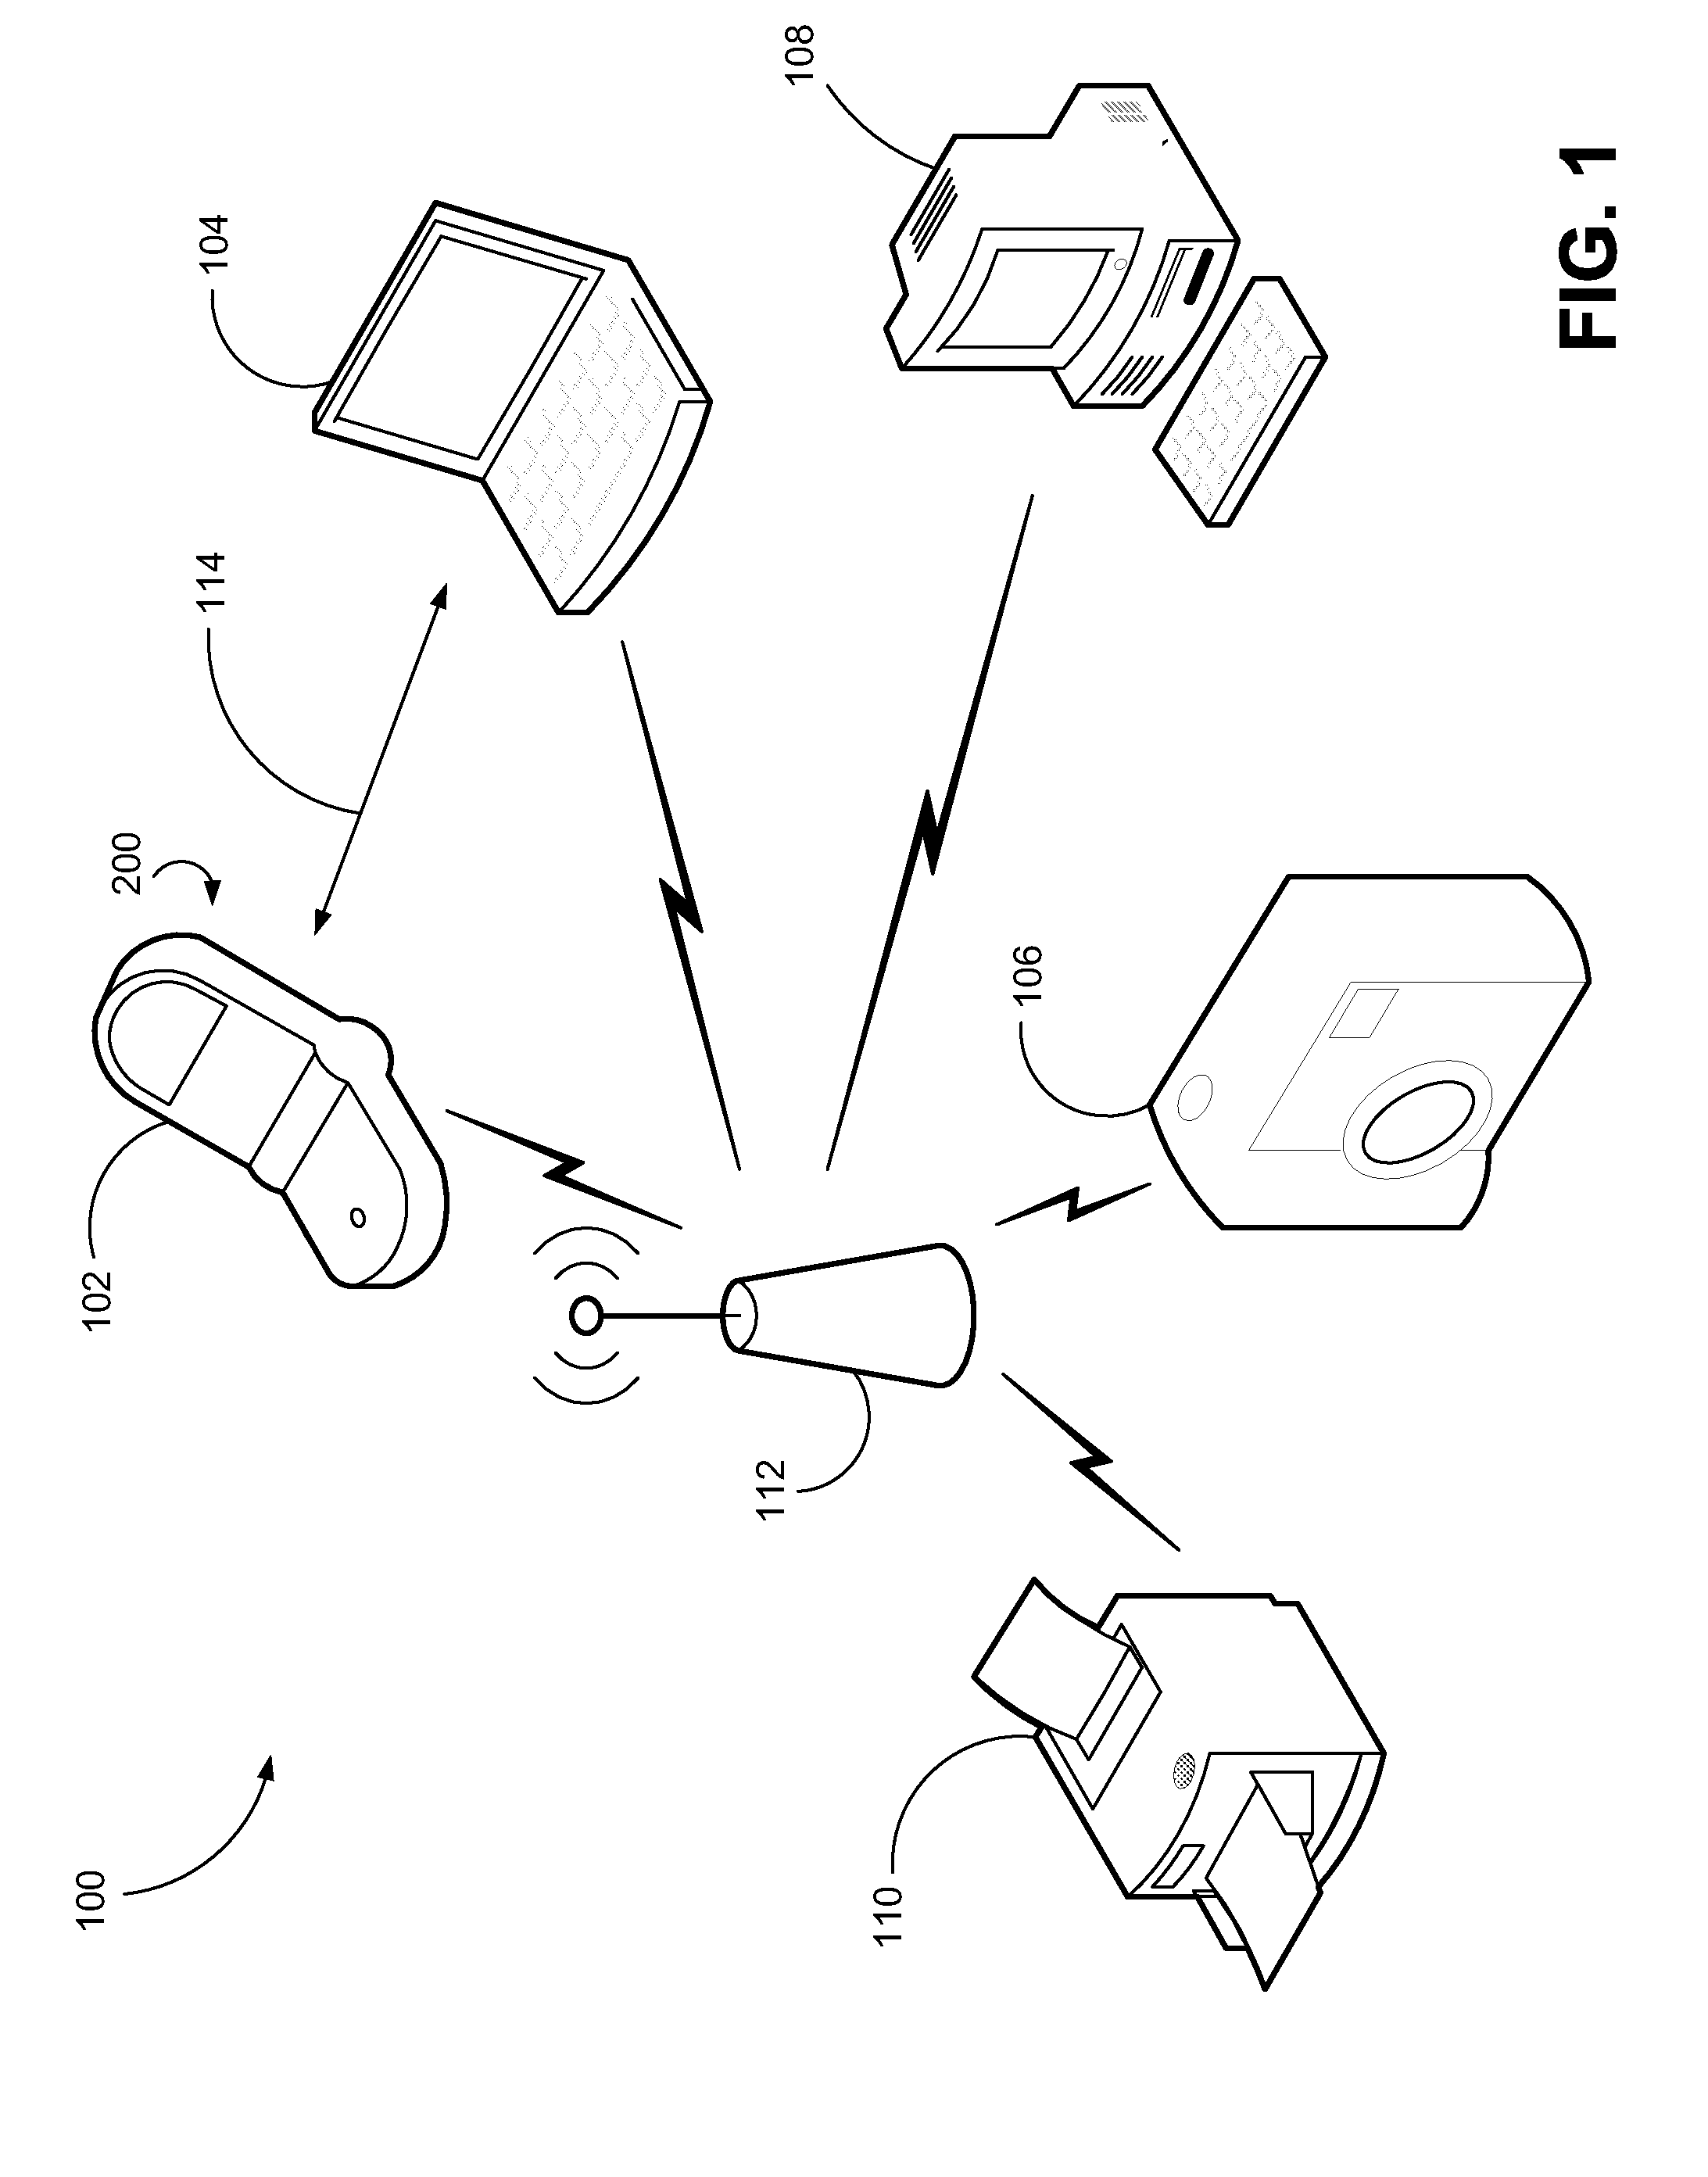 Access Point Polling Systems and Methods